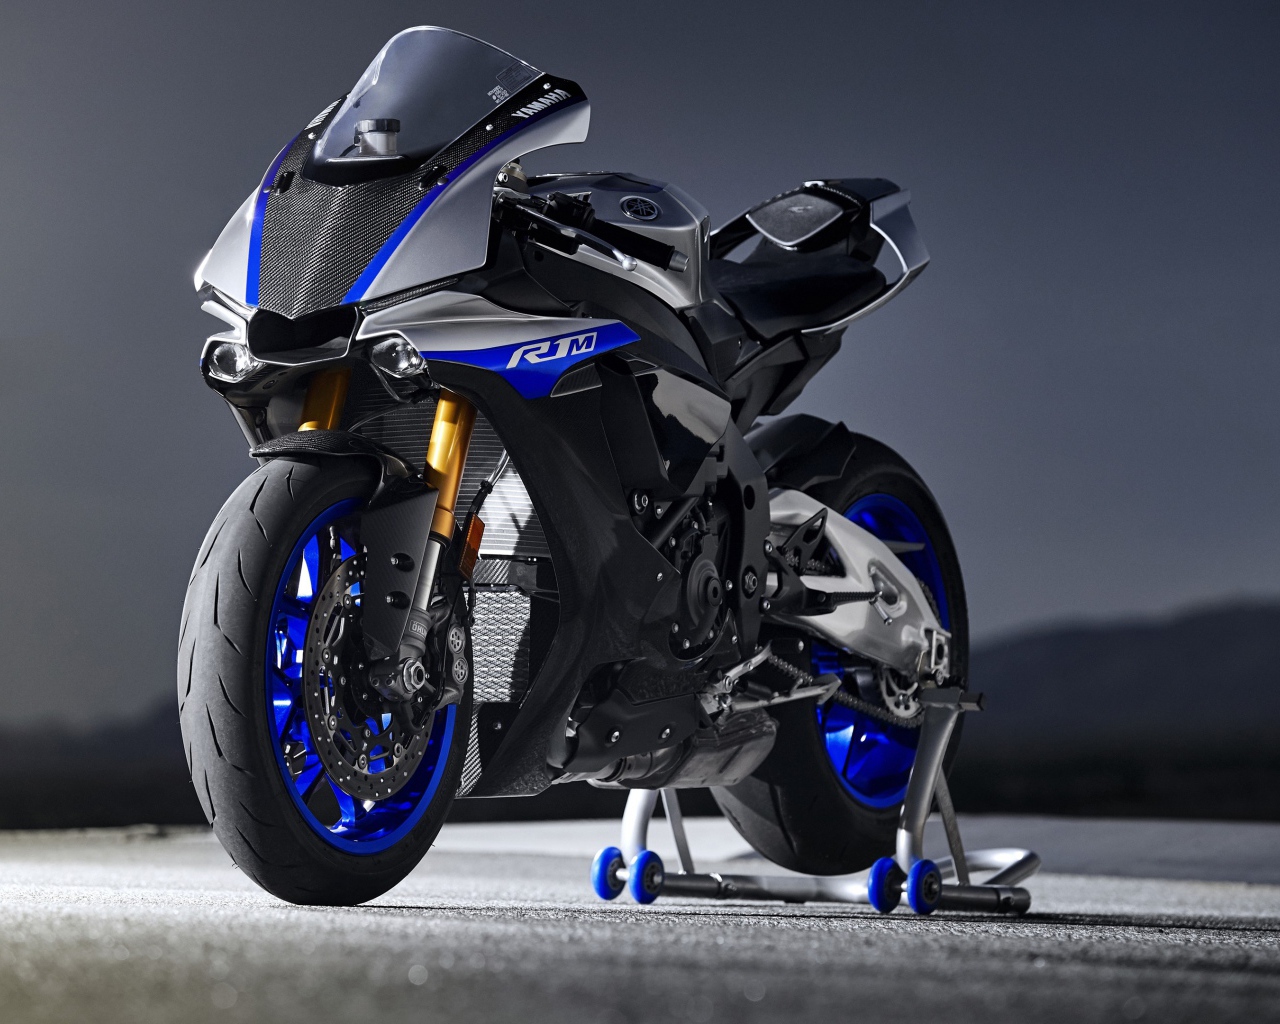 Yamaha R1 motorcycle on the highway